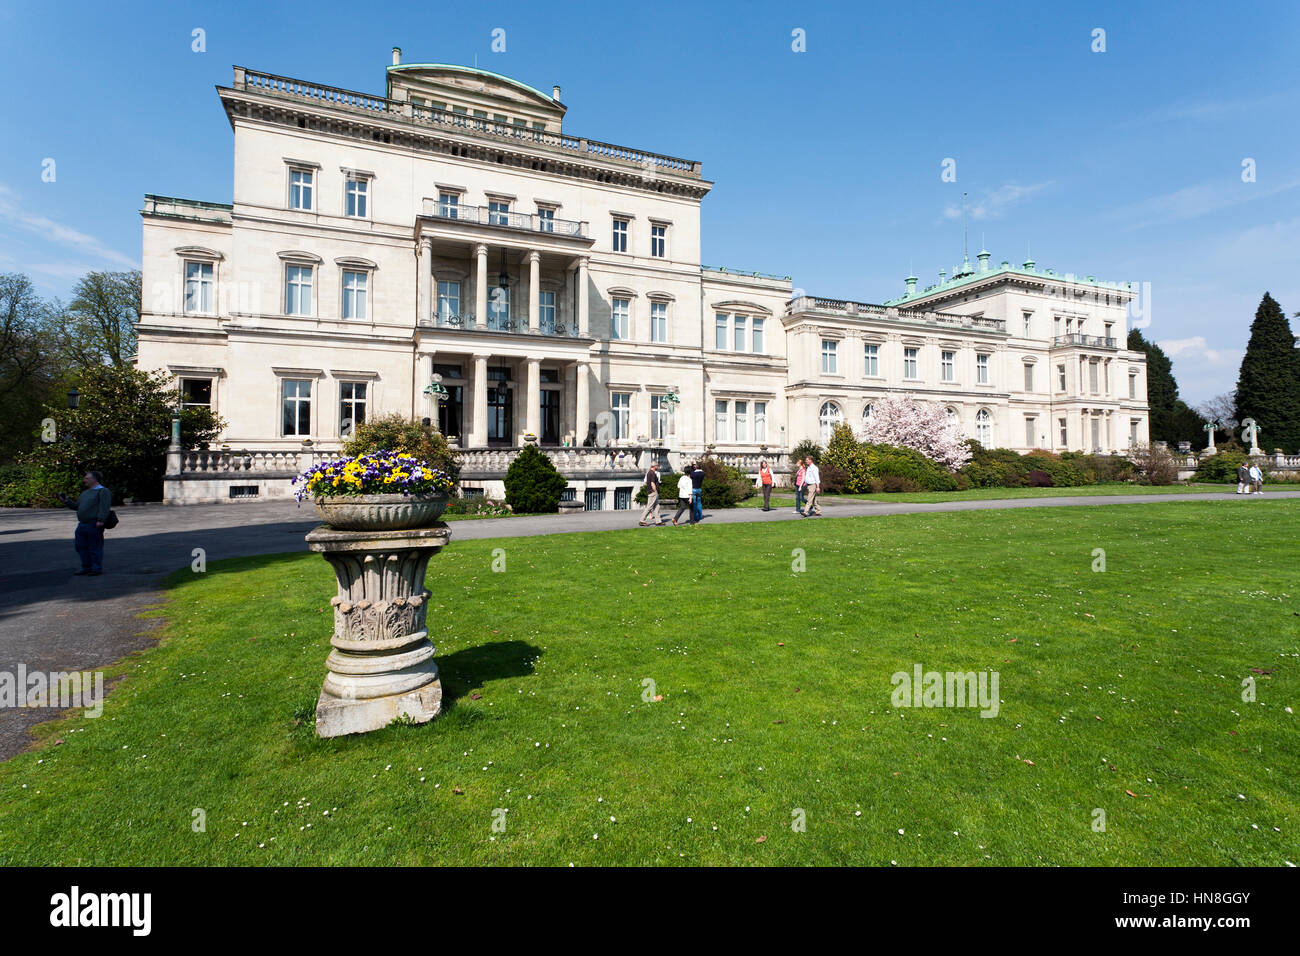 Essen, Germany - April 4, 2009: Villa Hügel is a mansion that belonged to the Krupp family of industrialists and was built during 1873 as a residence Stock Photo